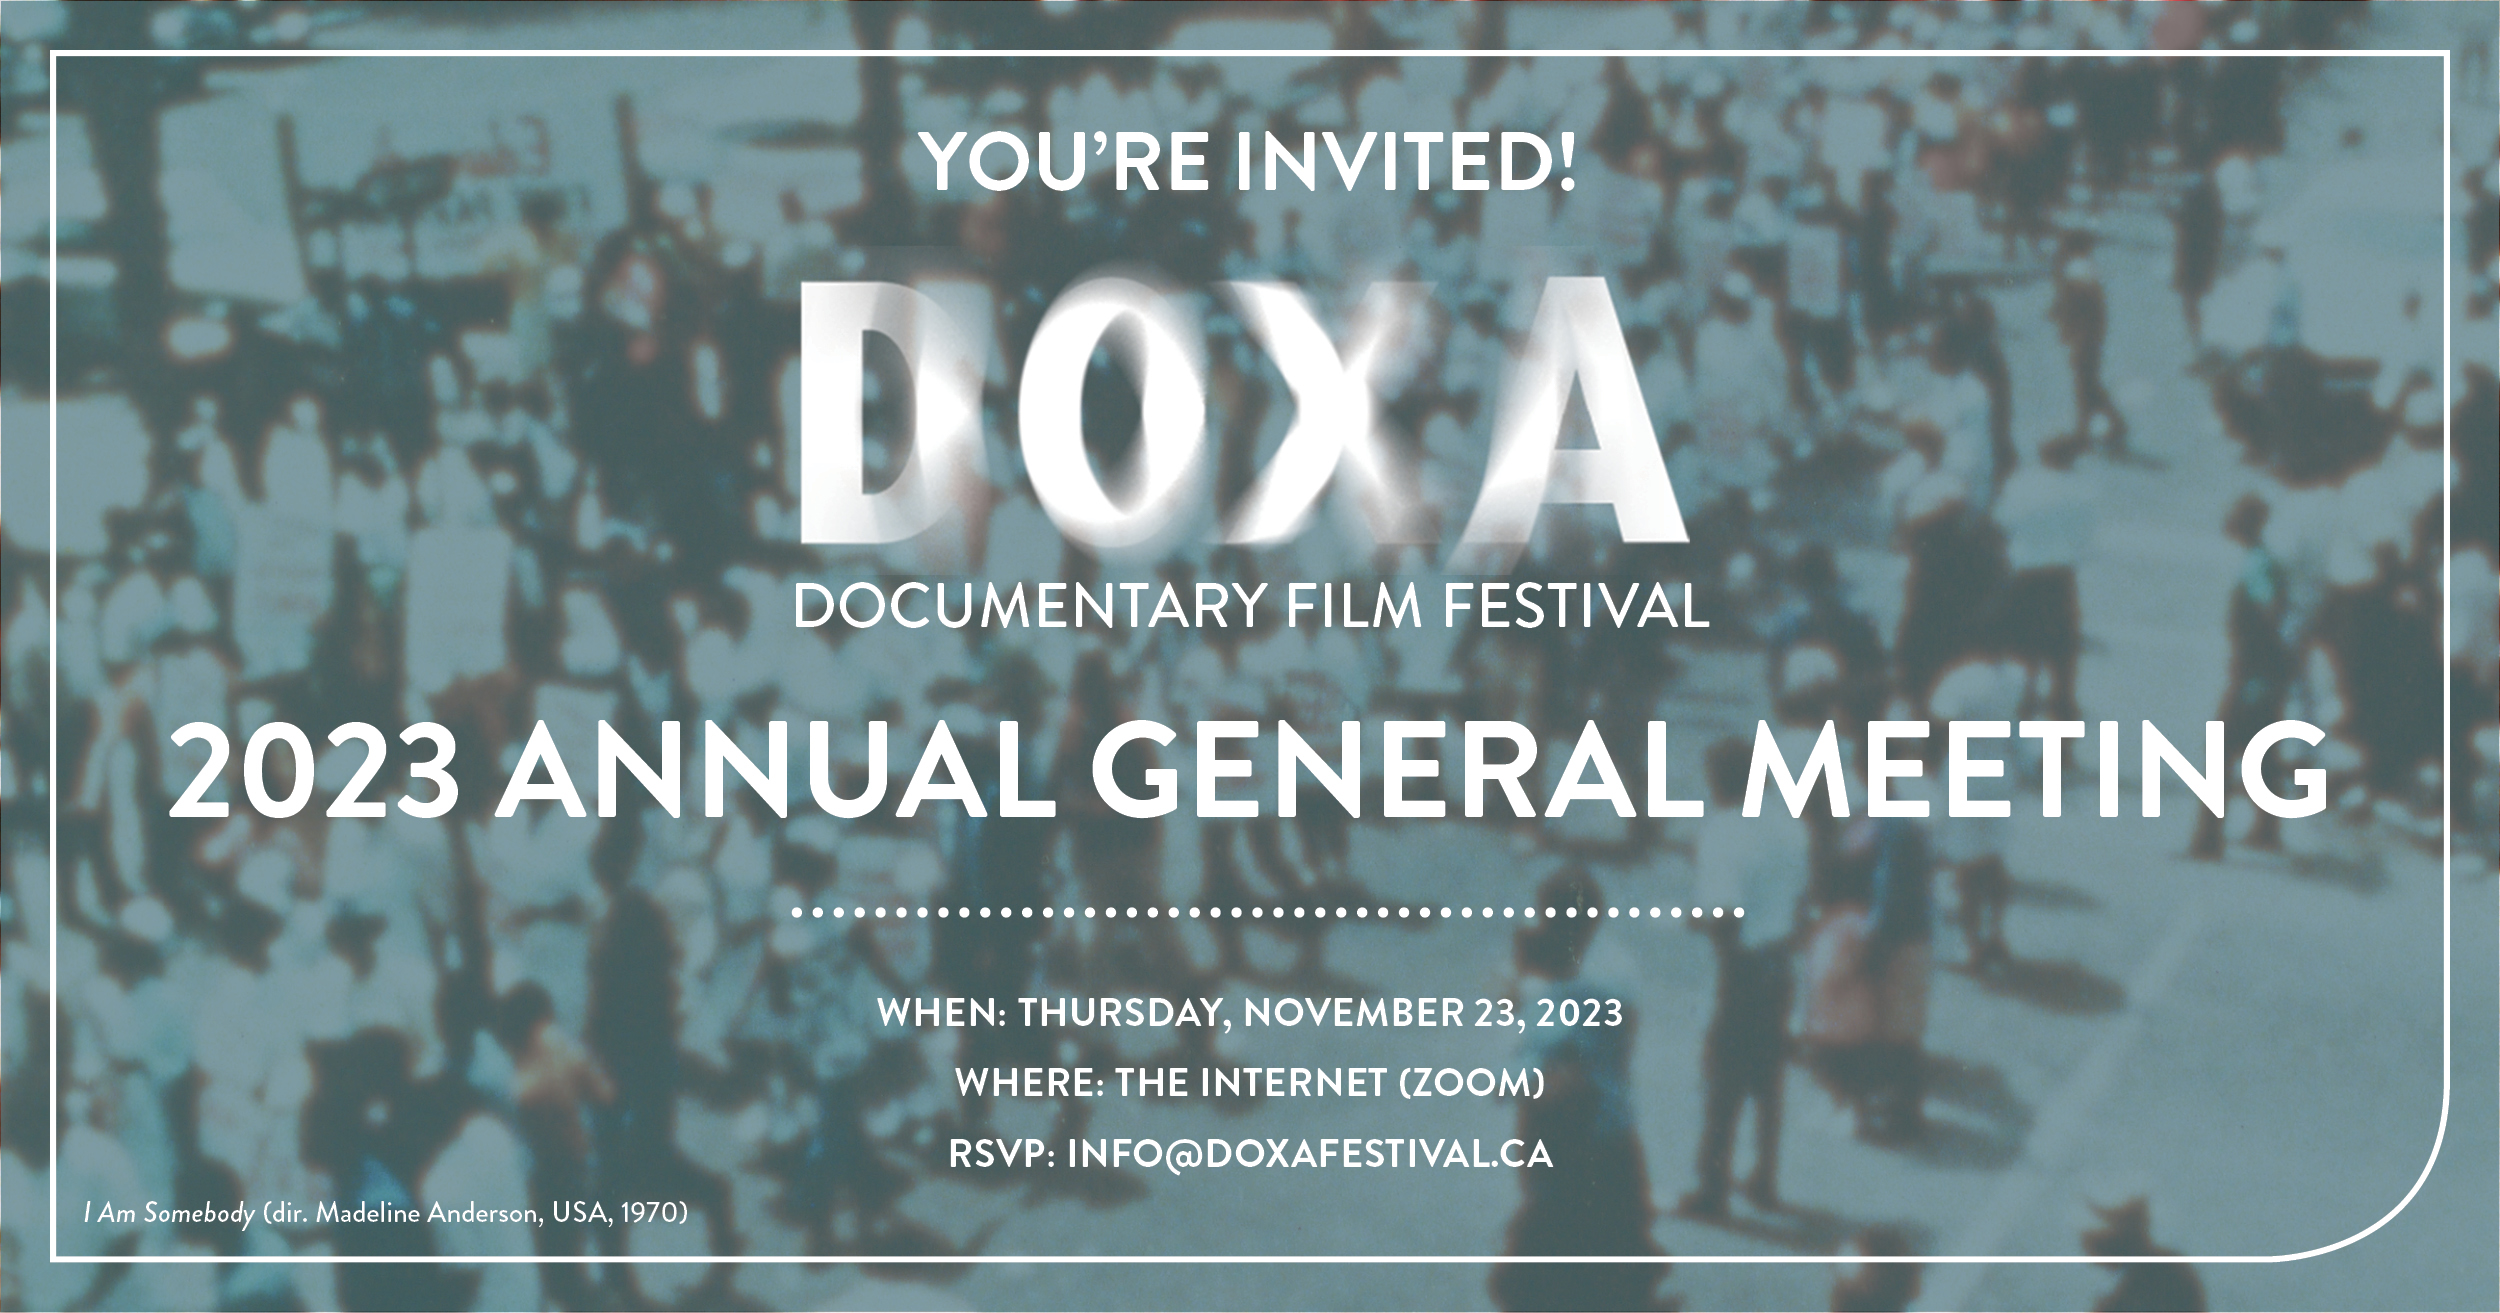 You're invited! DOXA Documentary Film Festival 2023 Annual General Meeting